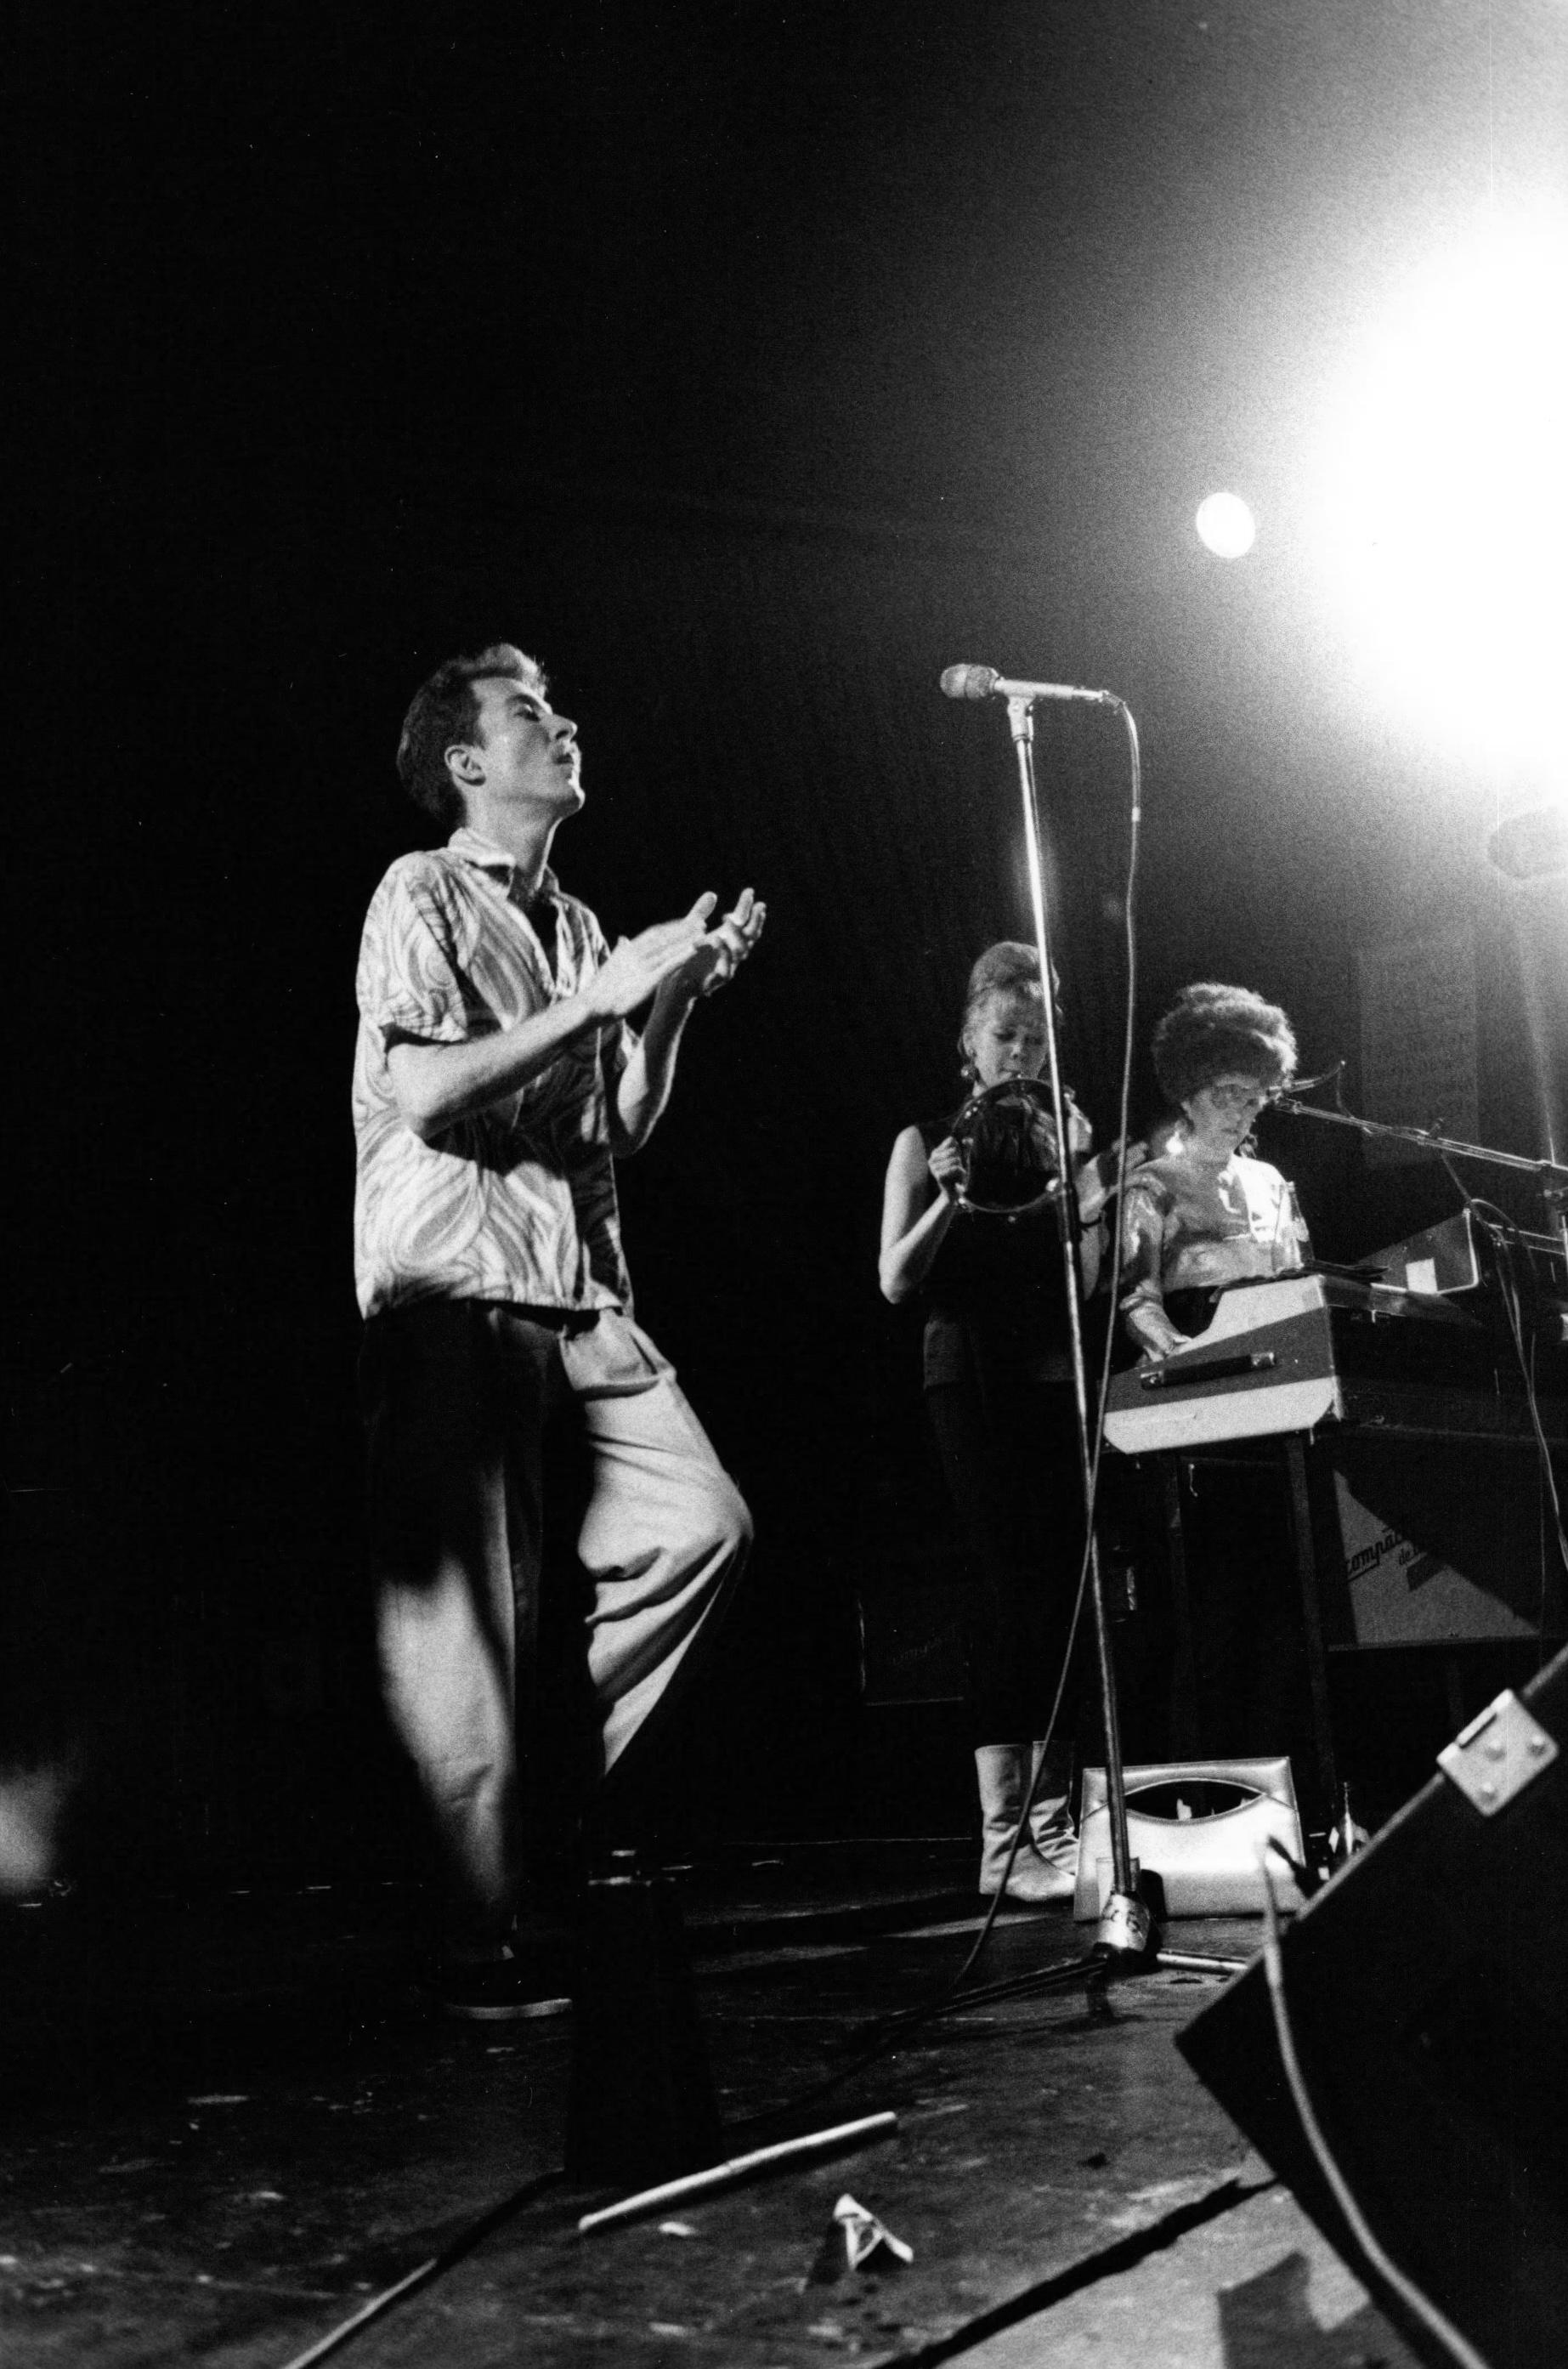 Paul Canty Black and White Photograph - The B-52s Jumping On Stage Vintage Original Photograph